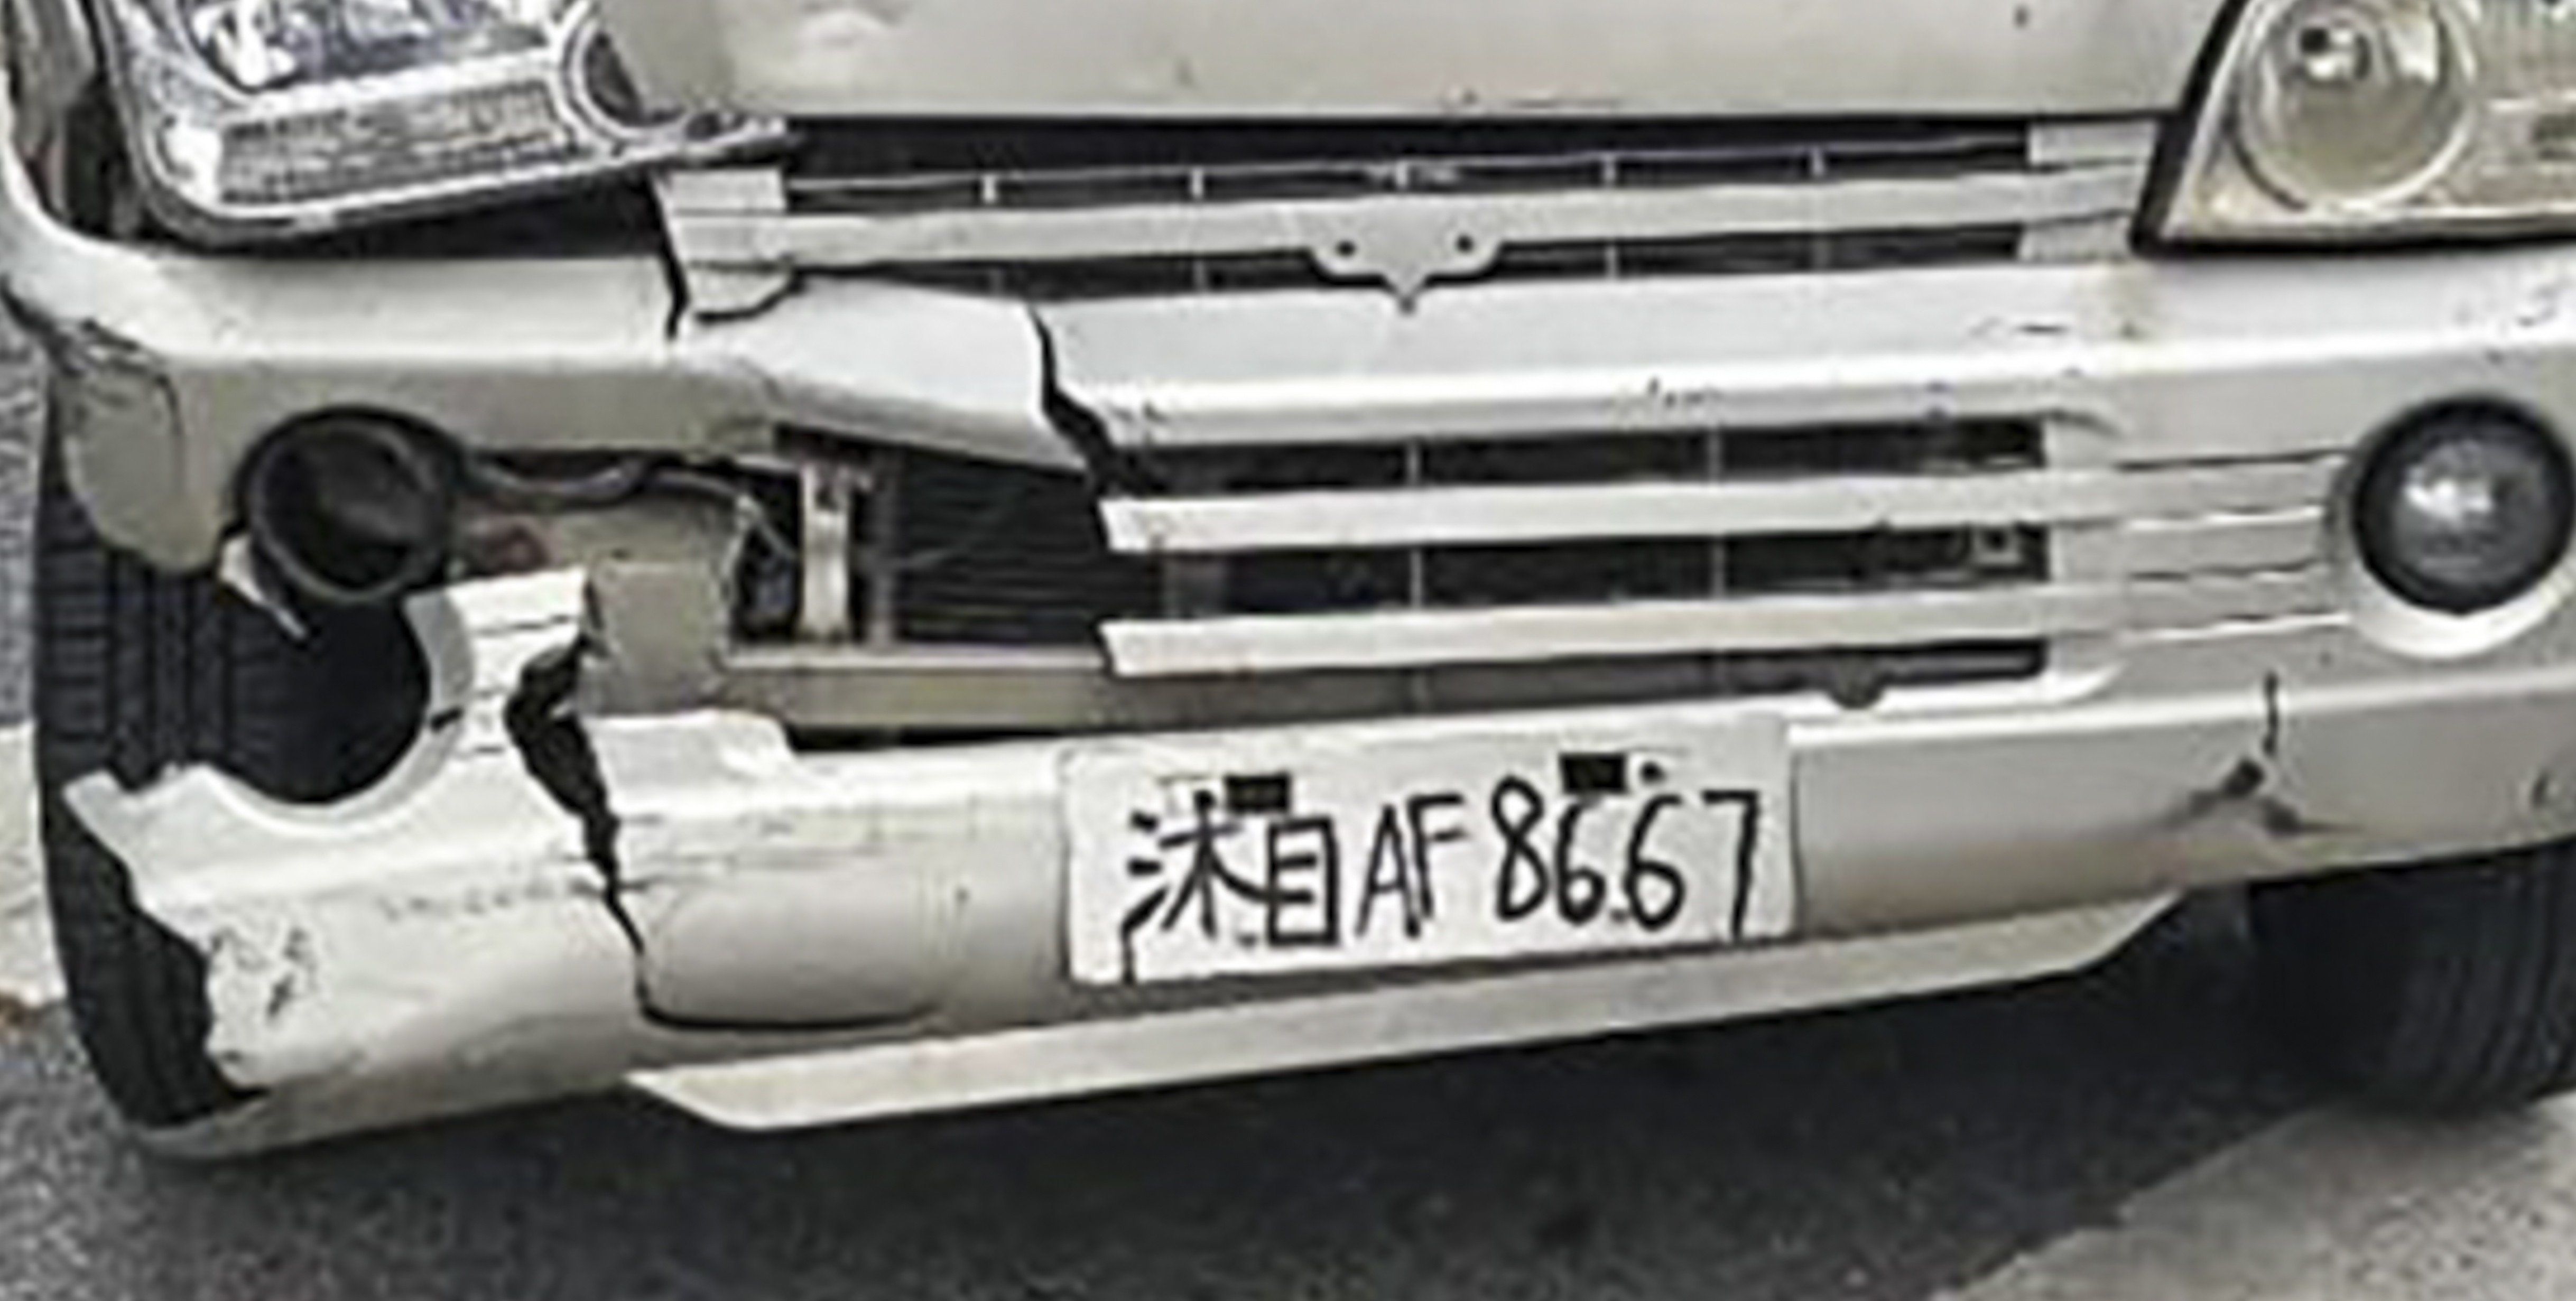 A Chinese motorist had his licence suspended for using a handwritten number plate on his van. Photo: Sohu.com